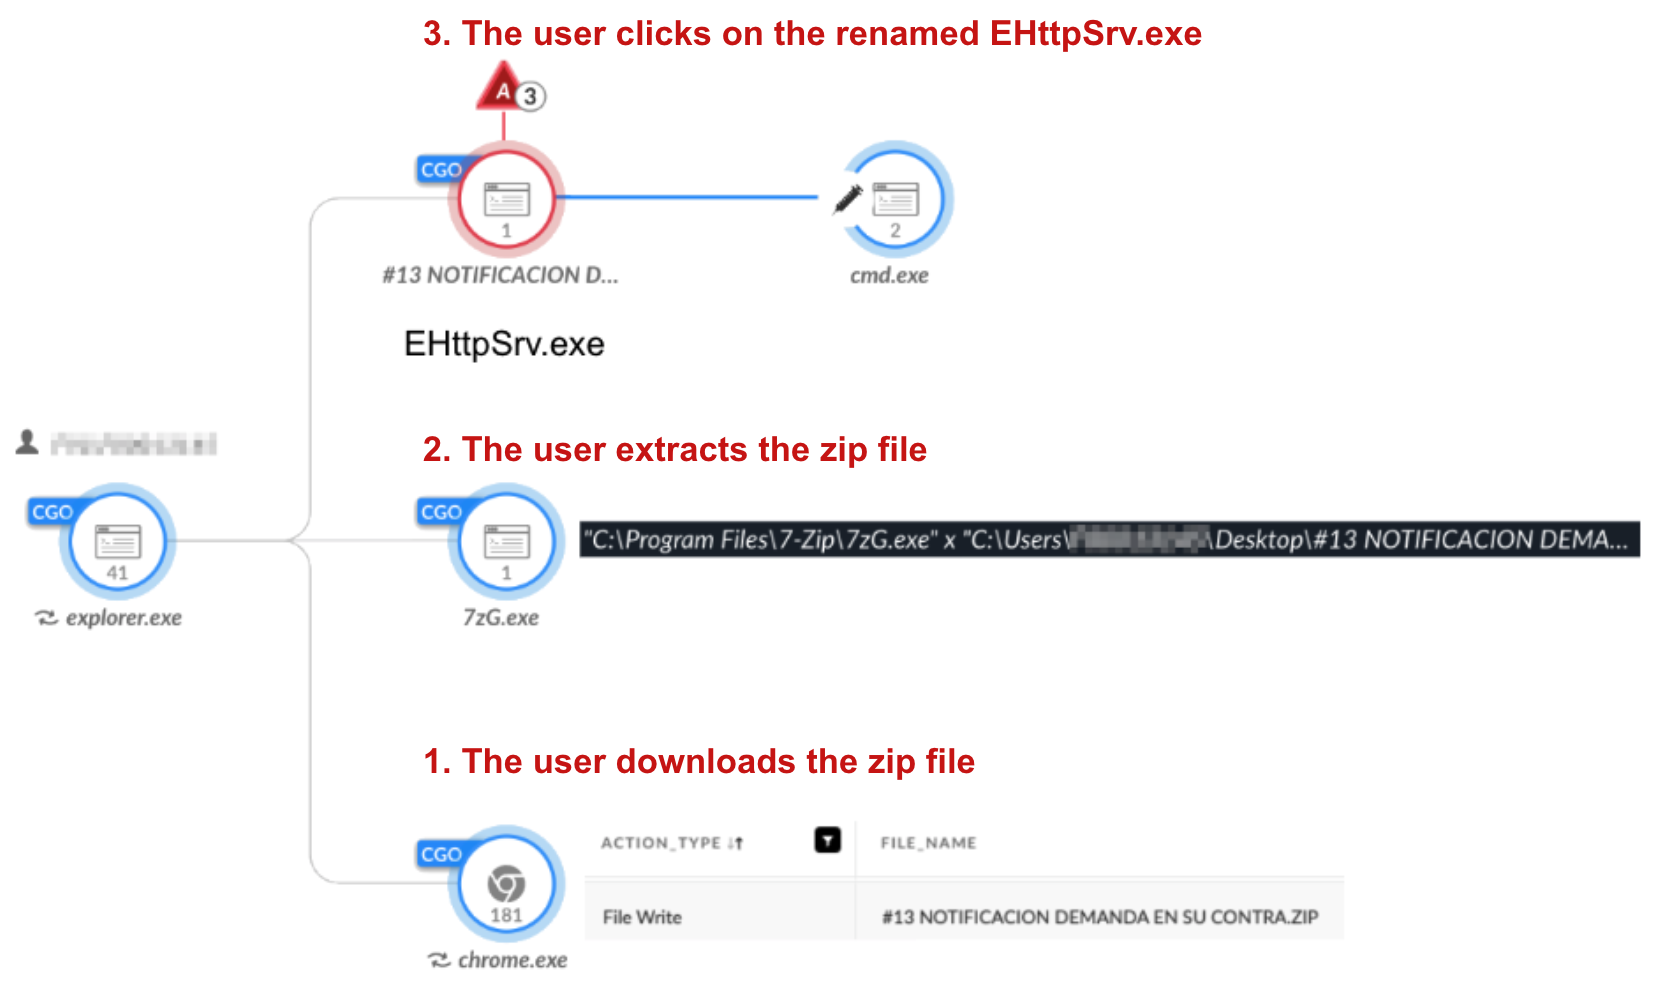 Image 7 is a screenshot of a tree diagram of alerts in Cortex XDR. Following the process tree, the steps are: 1. The user downloads the zip file. 2. The user extracts the zip file. 3. The user clicks on the renamed EHttpSrv.exe. 